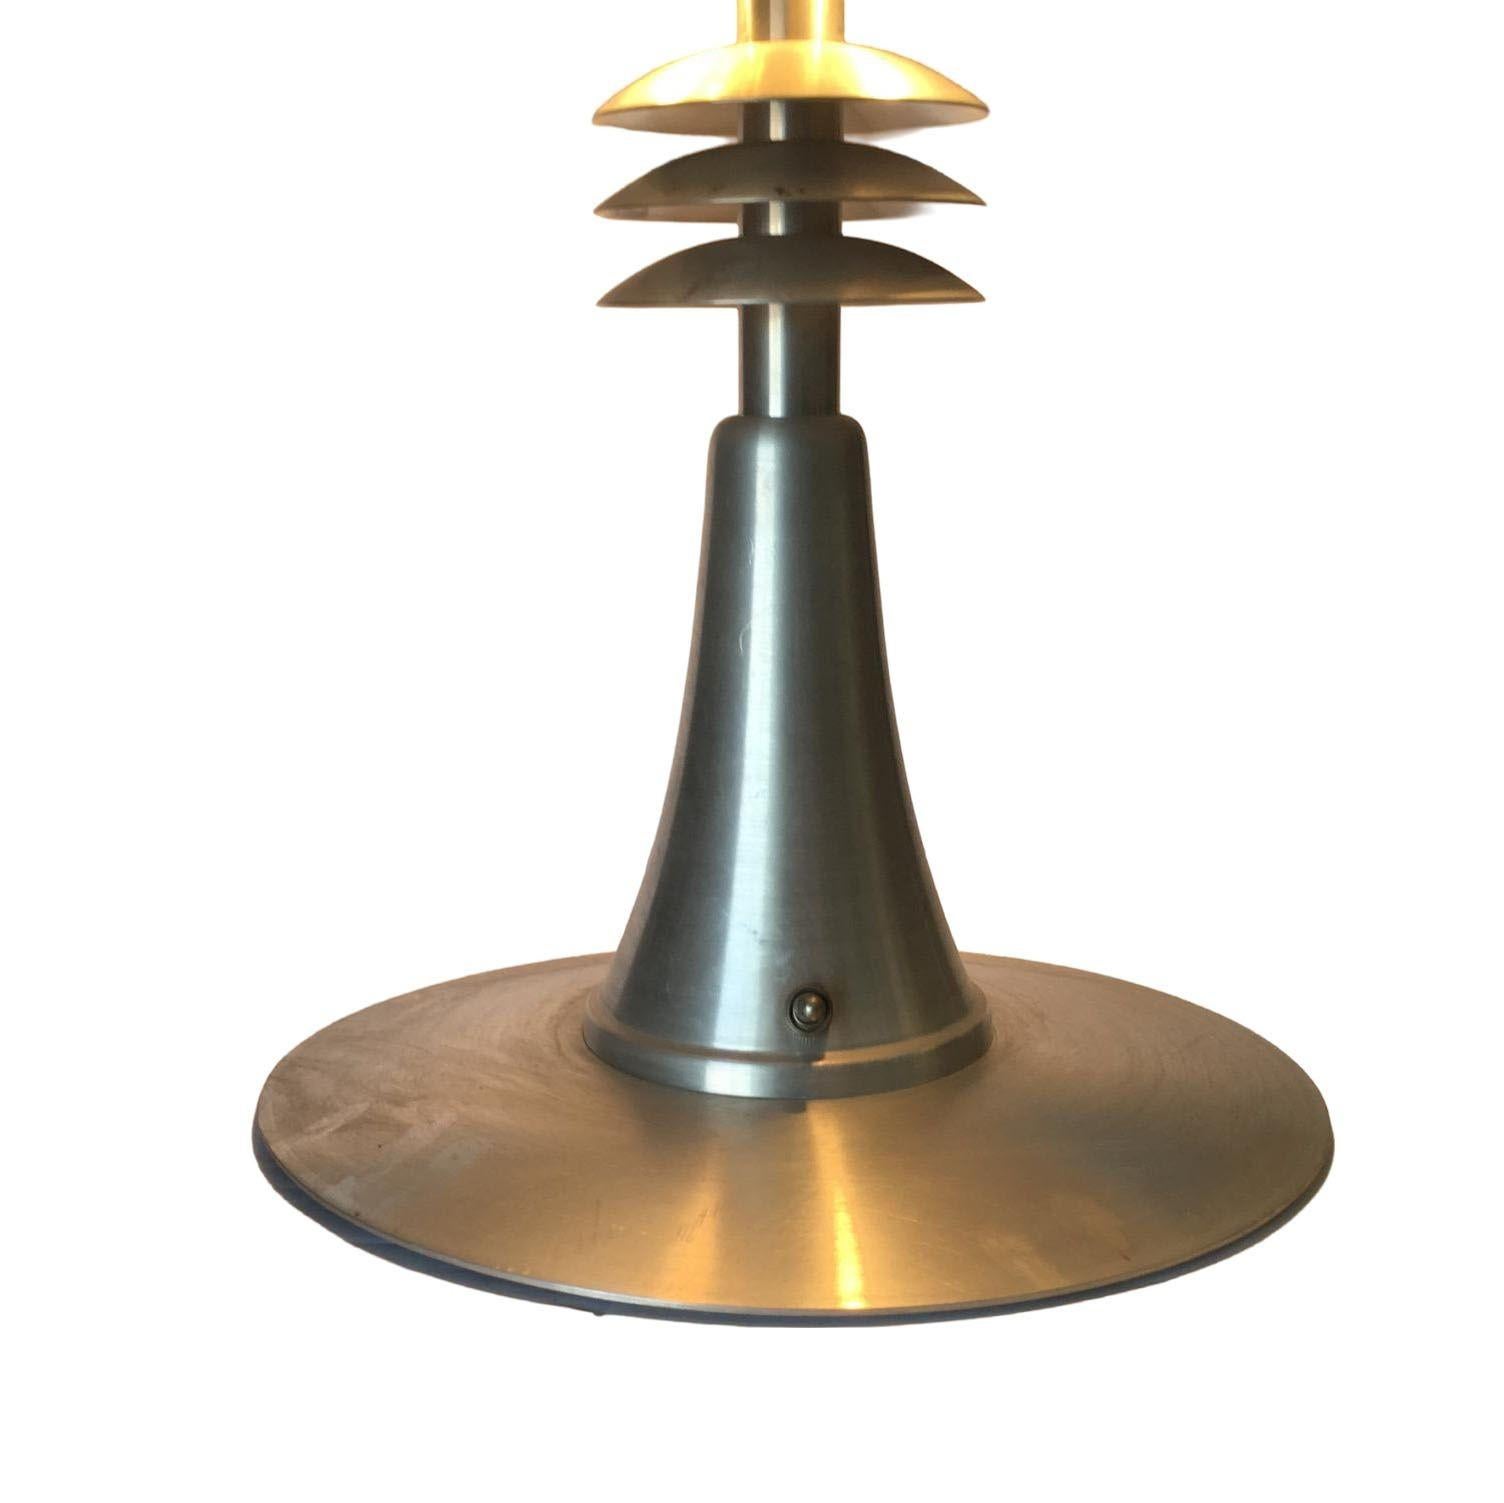 Art Deco Style Machine Age Table Lamp with Large Spun Aluminum Shade In Excellent Condition For Sale In Van Nuys, CA